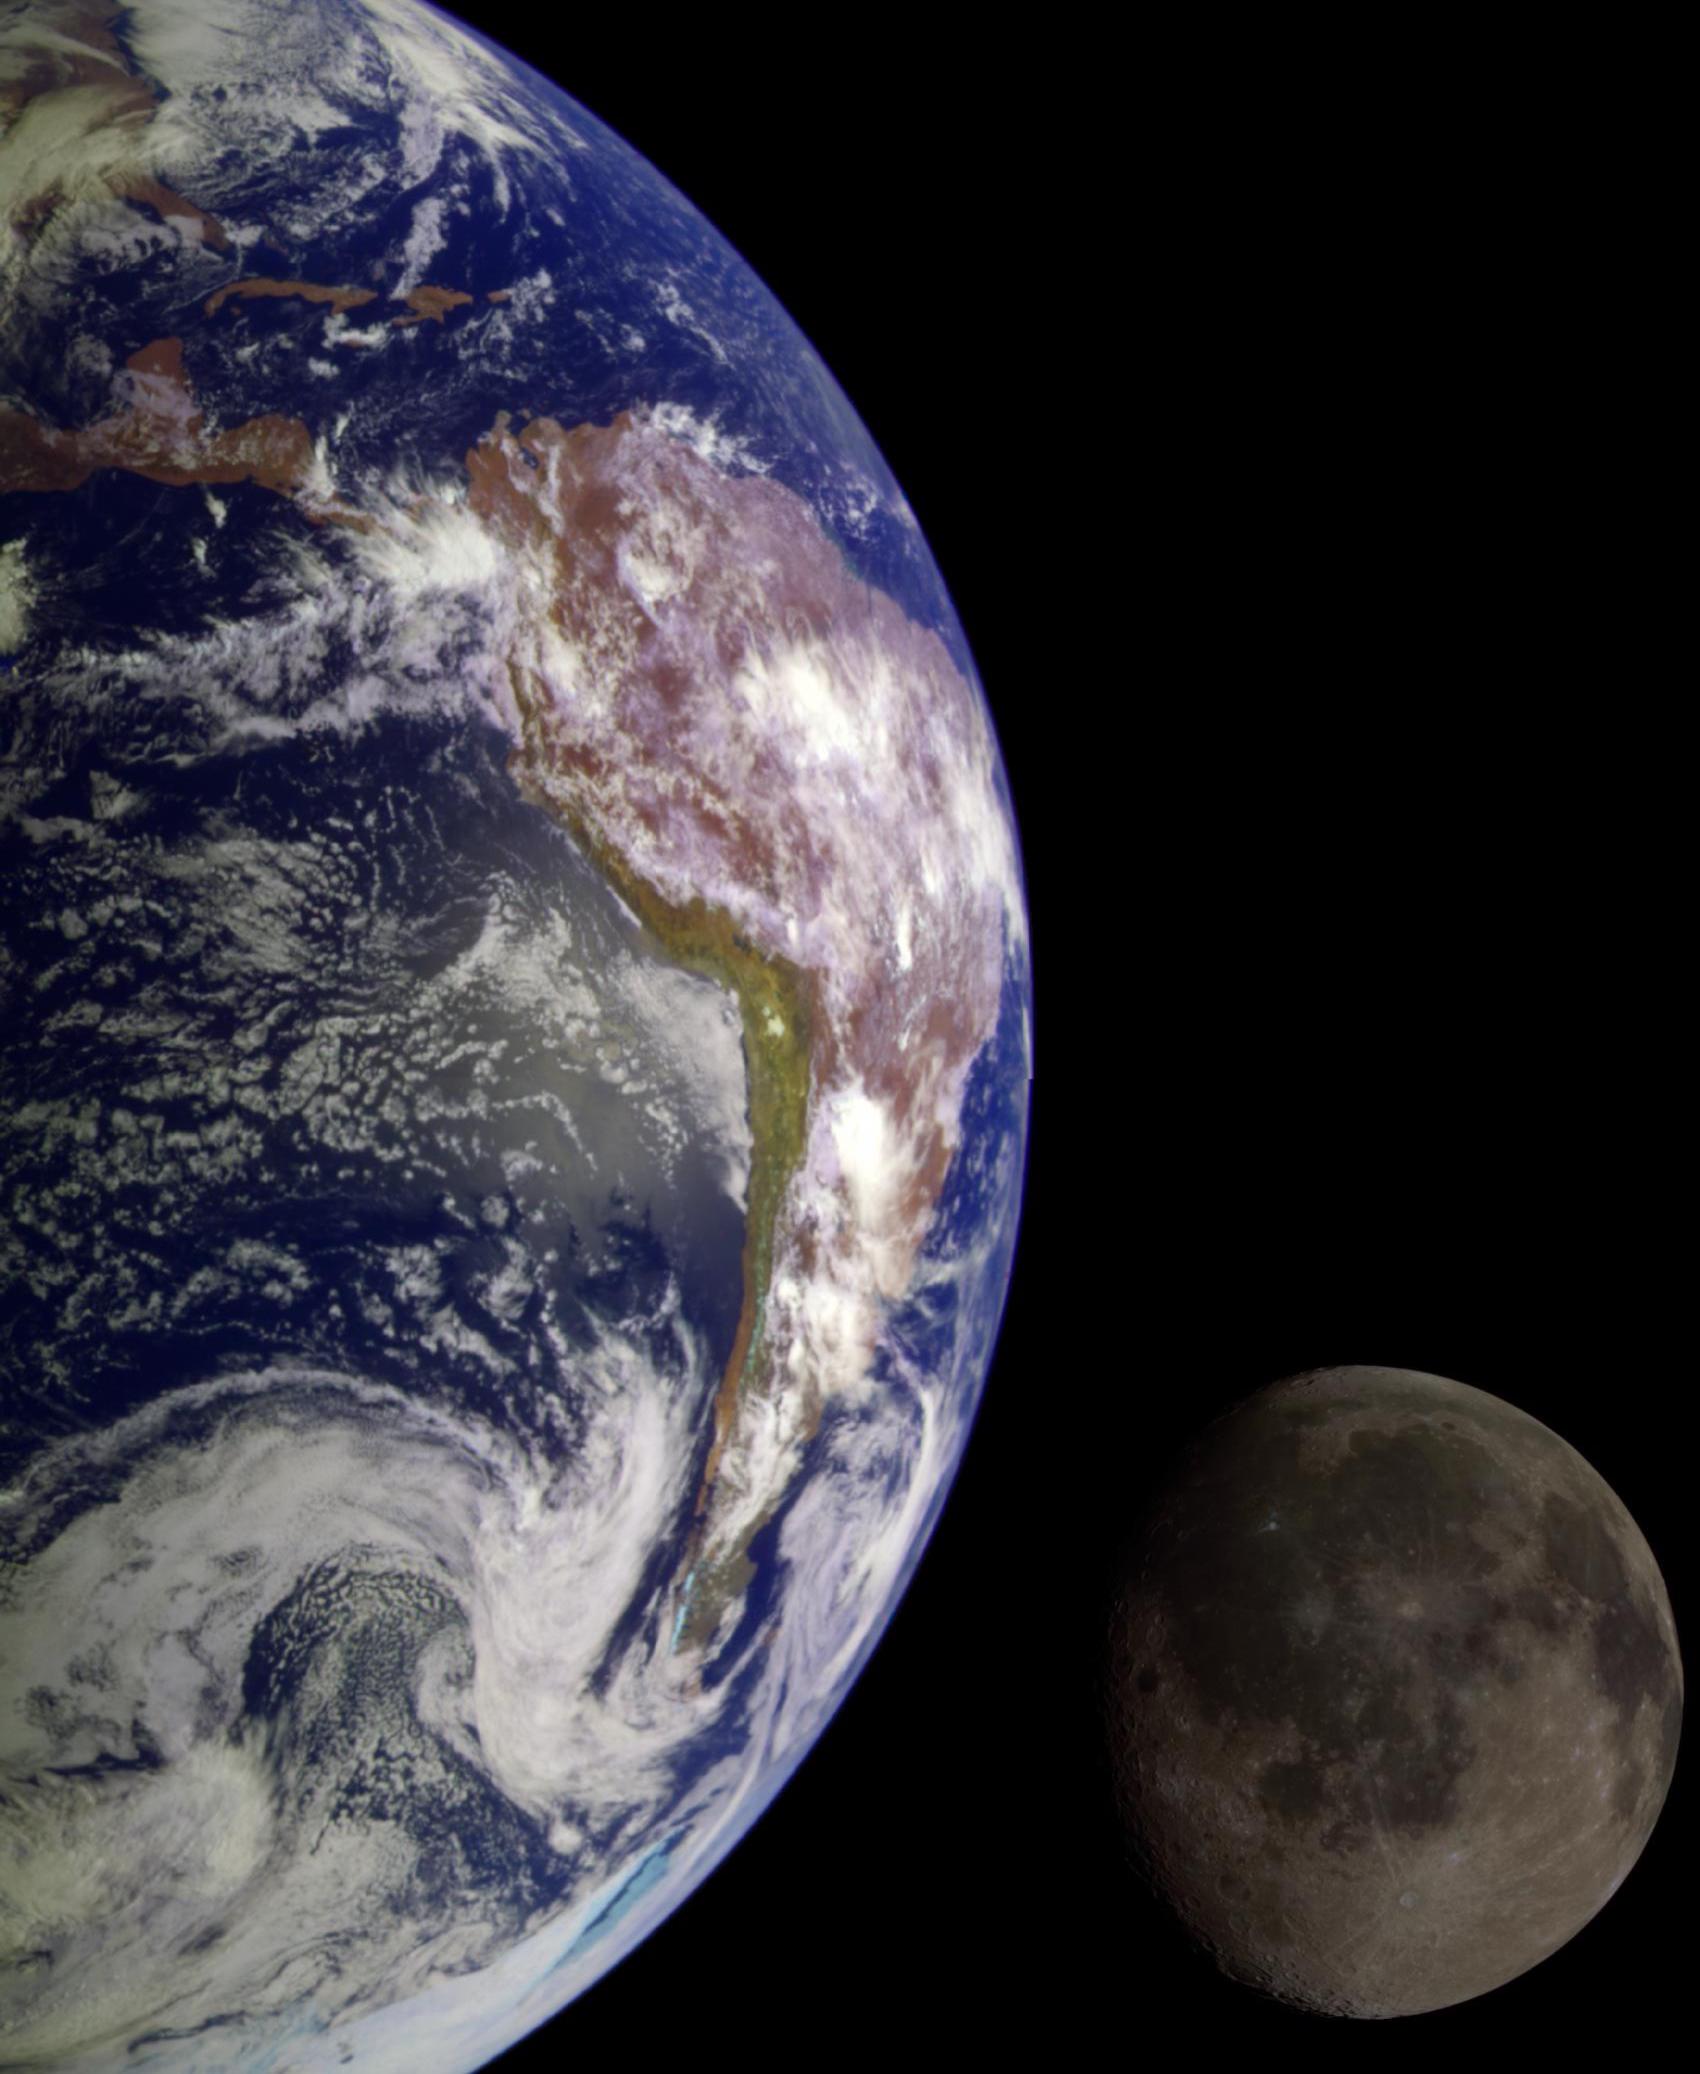 Photo: Composite of Earth and moon